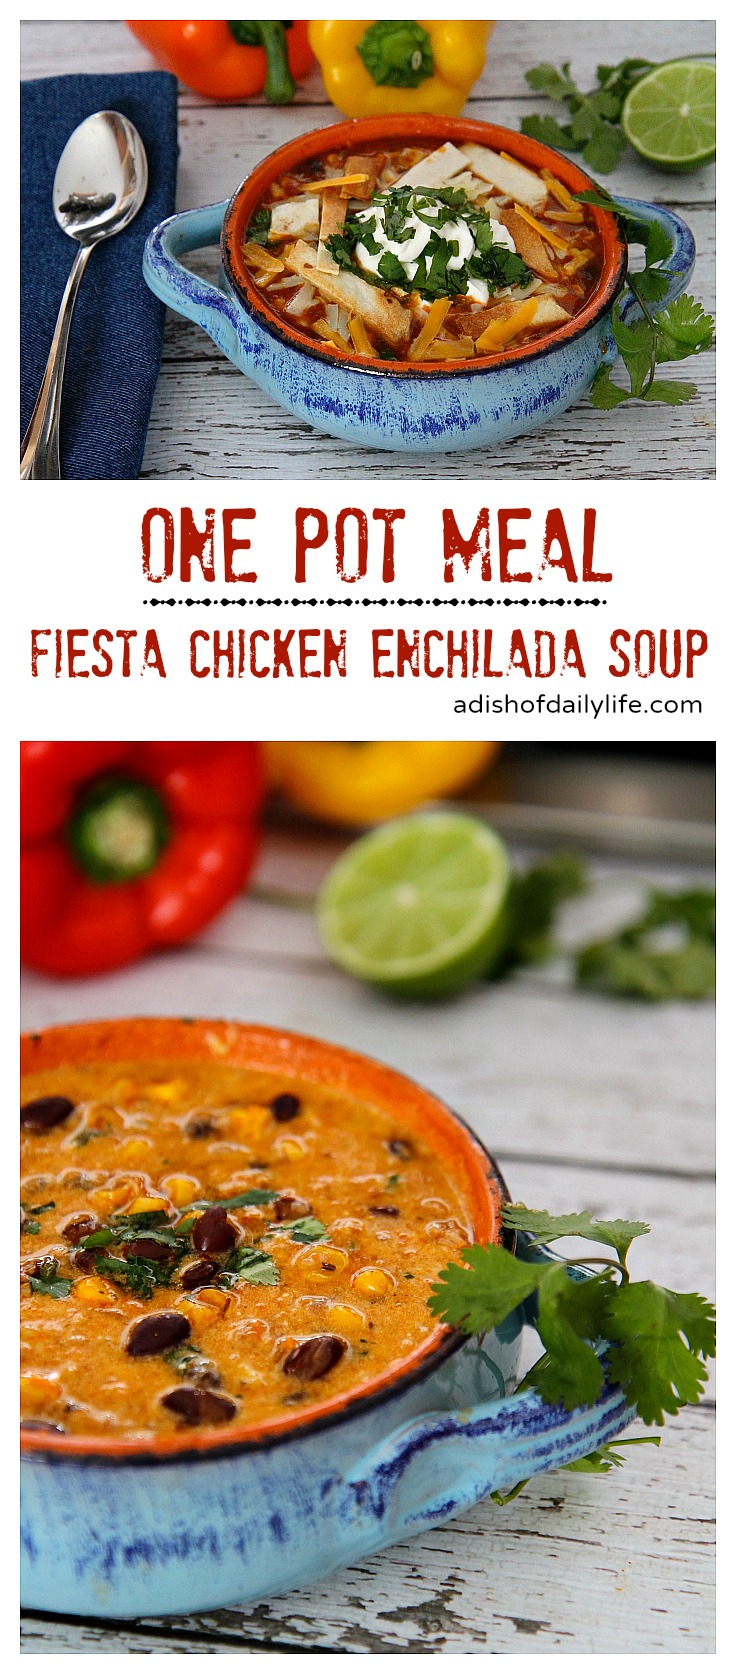 This one pot Fiesta Chicken Enchilada Soup can be ready in 30 minutes. Perfect for families on the go! #OnePotMeal #30MinMeal